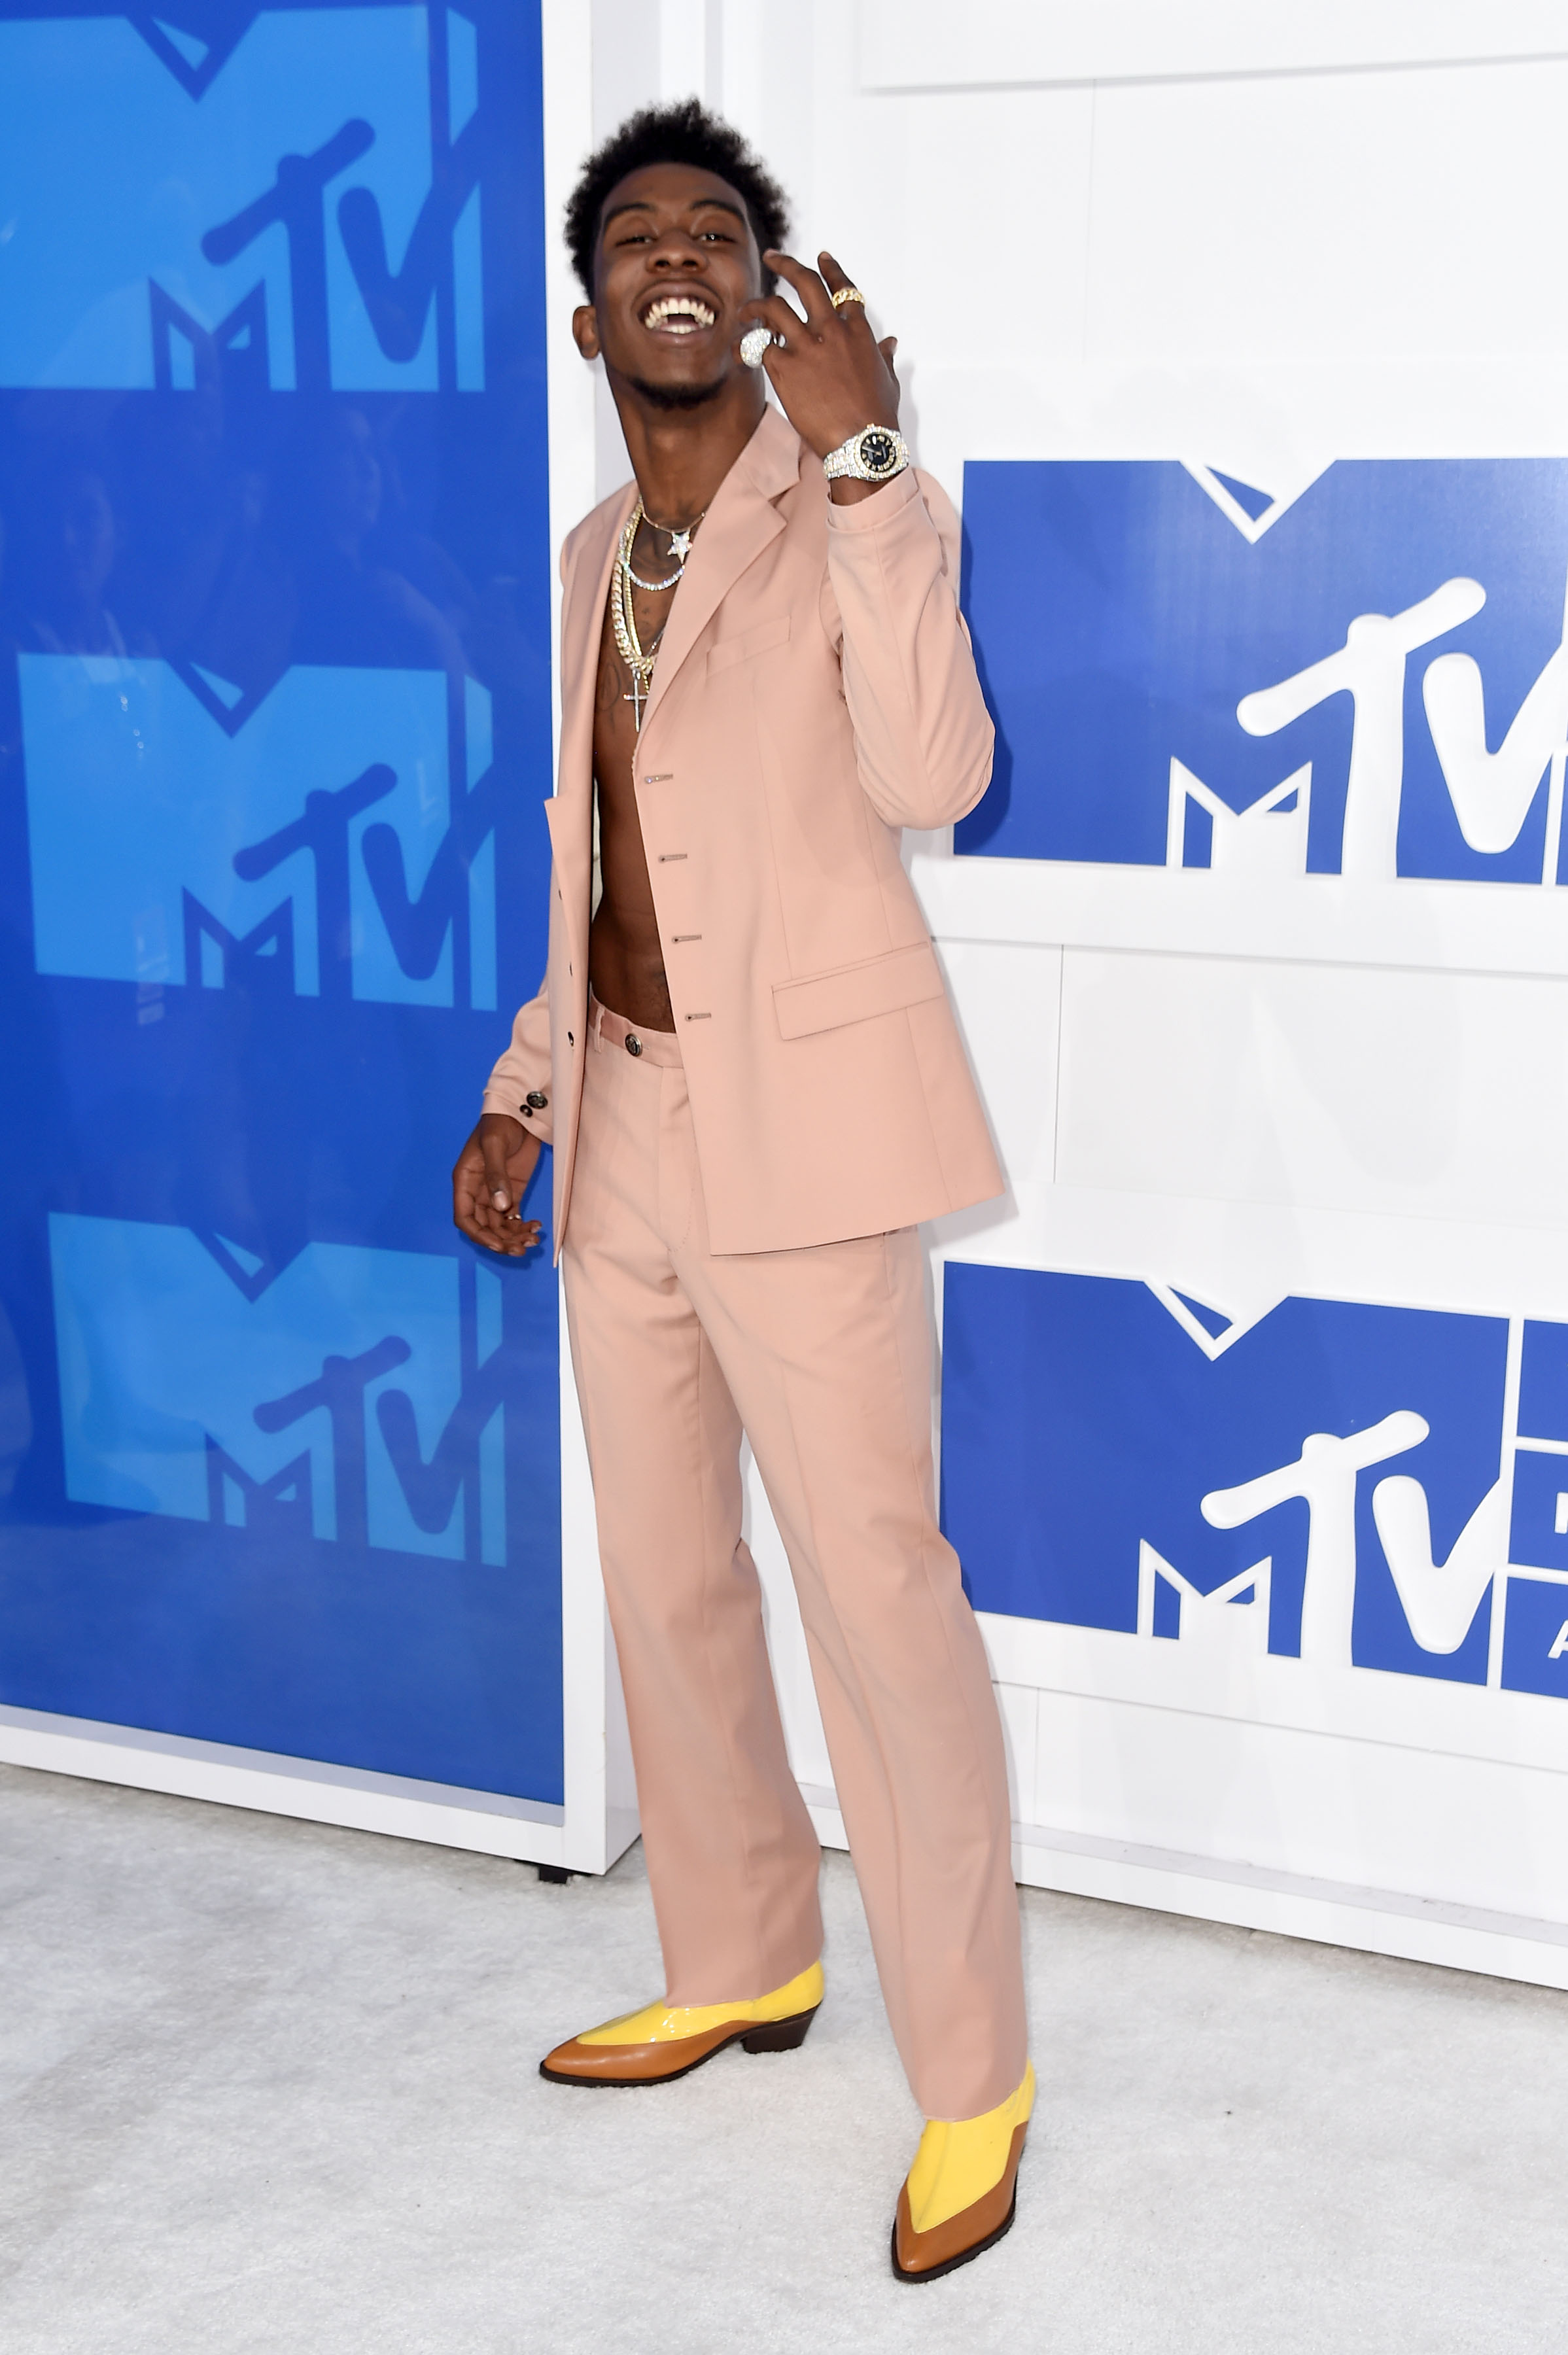 Desiigner attends the 2016 MTV Video Music Awards at Madison Square Garden on Aug. 28, 2016 in New York City.